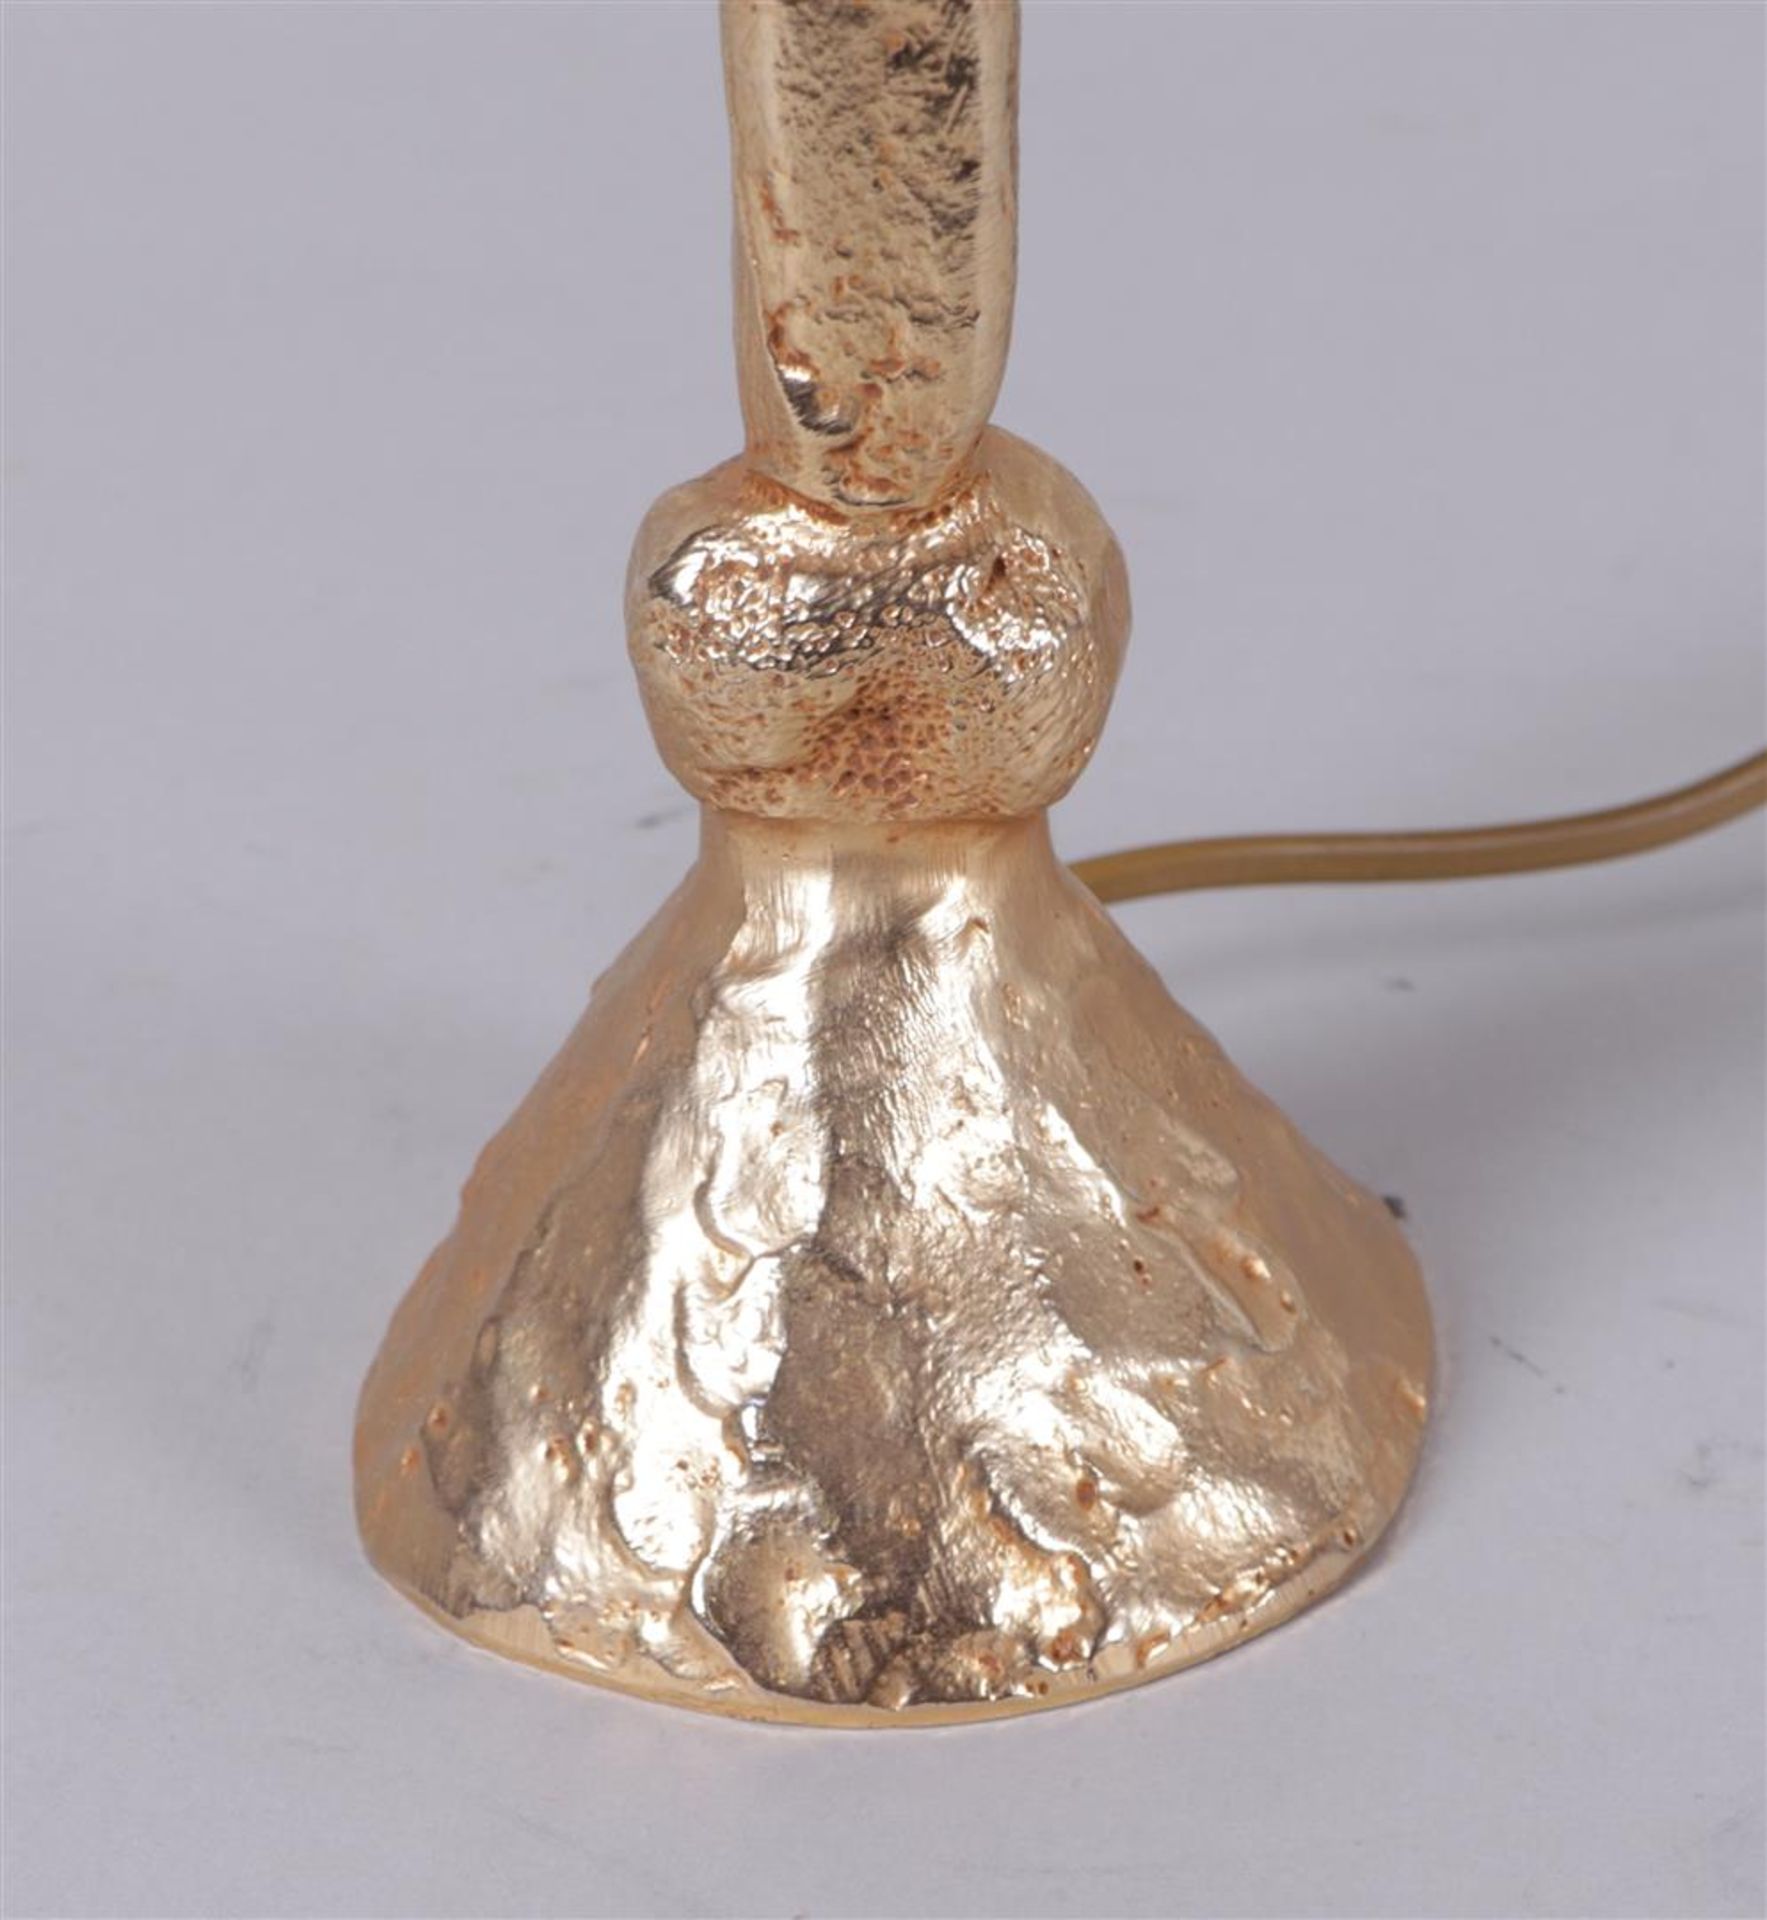 Pierre Casenove for Fondica, 'bird' gold-plated lamp. Signed on the base.
H. 45 cm. - Image 3 of 4